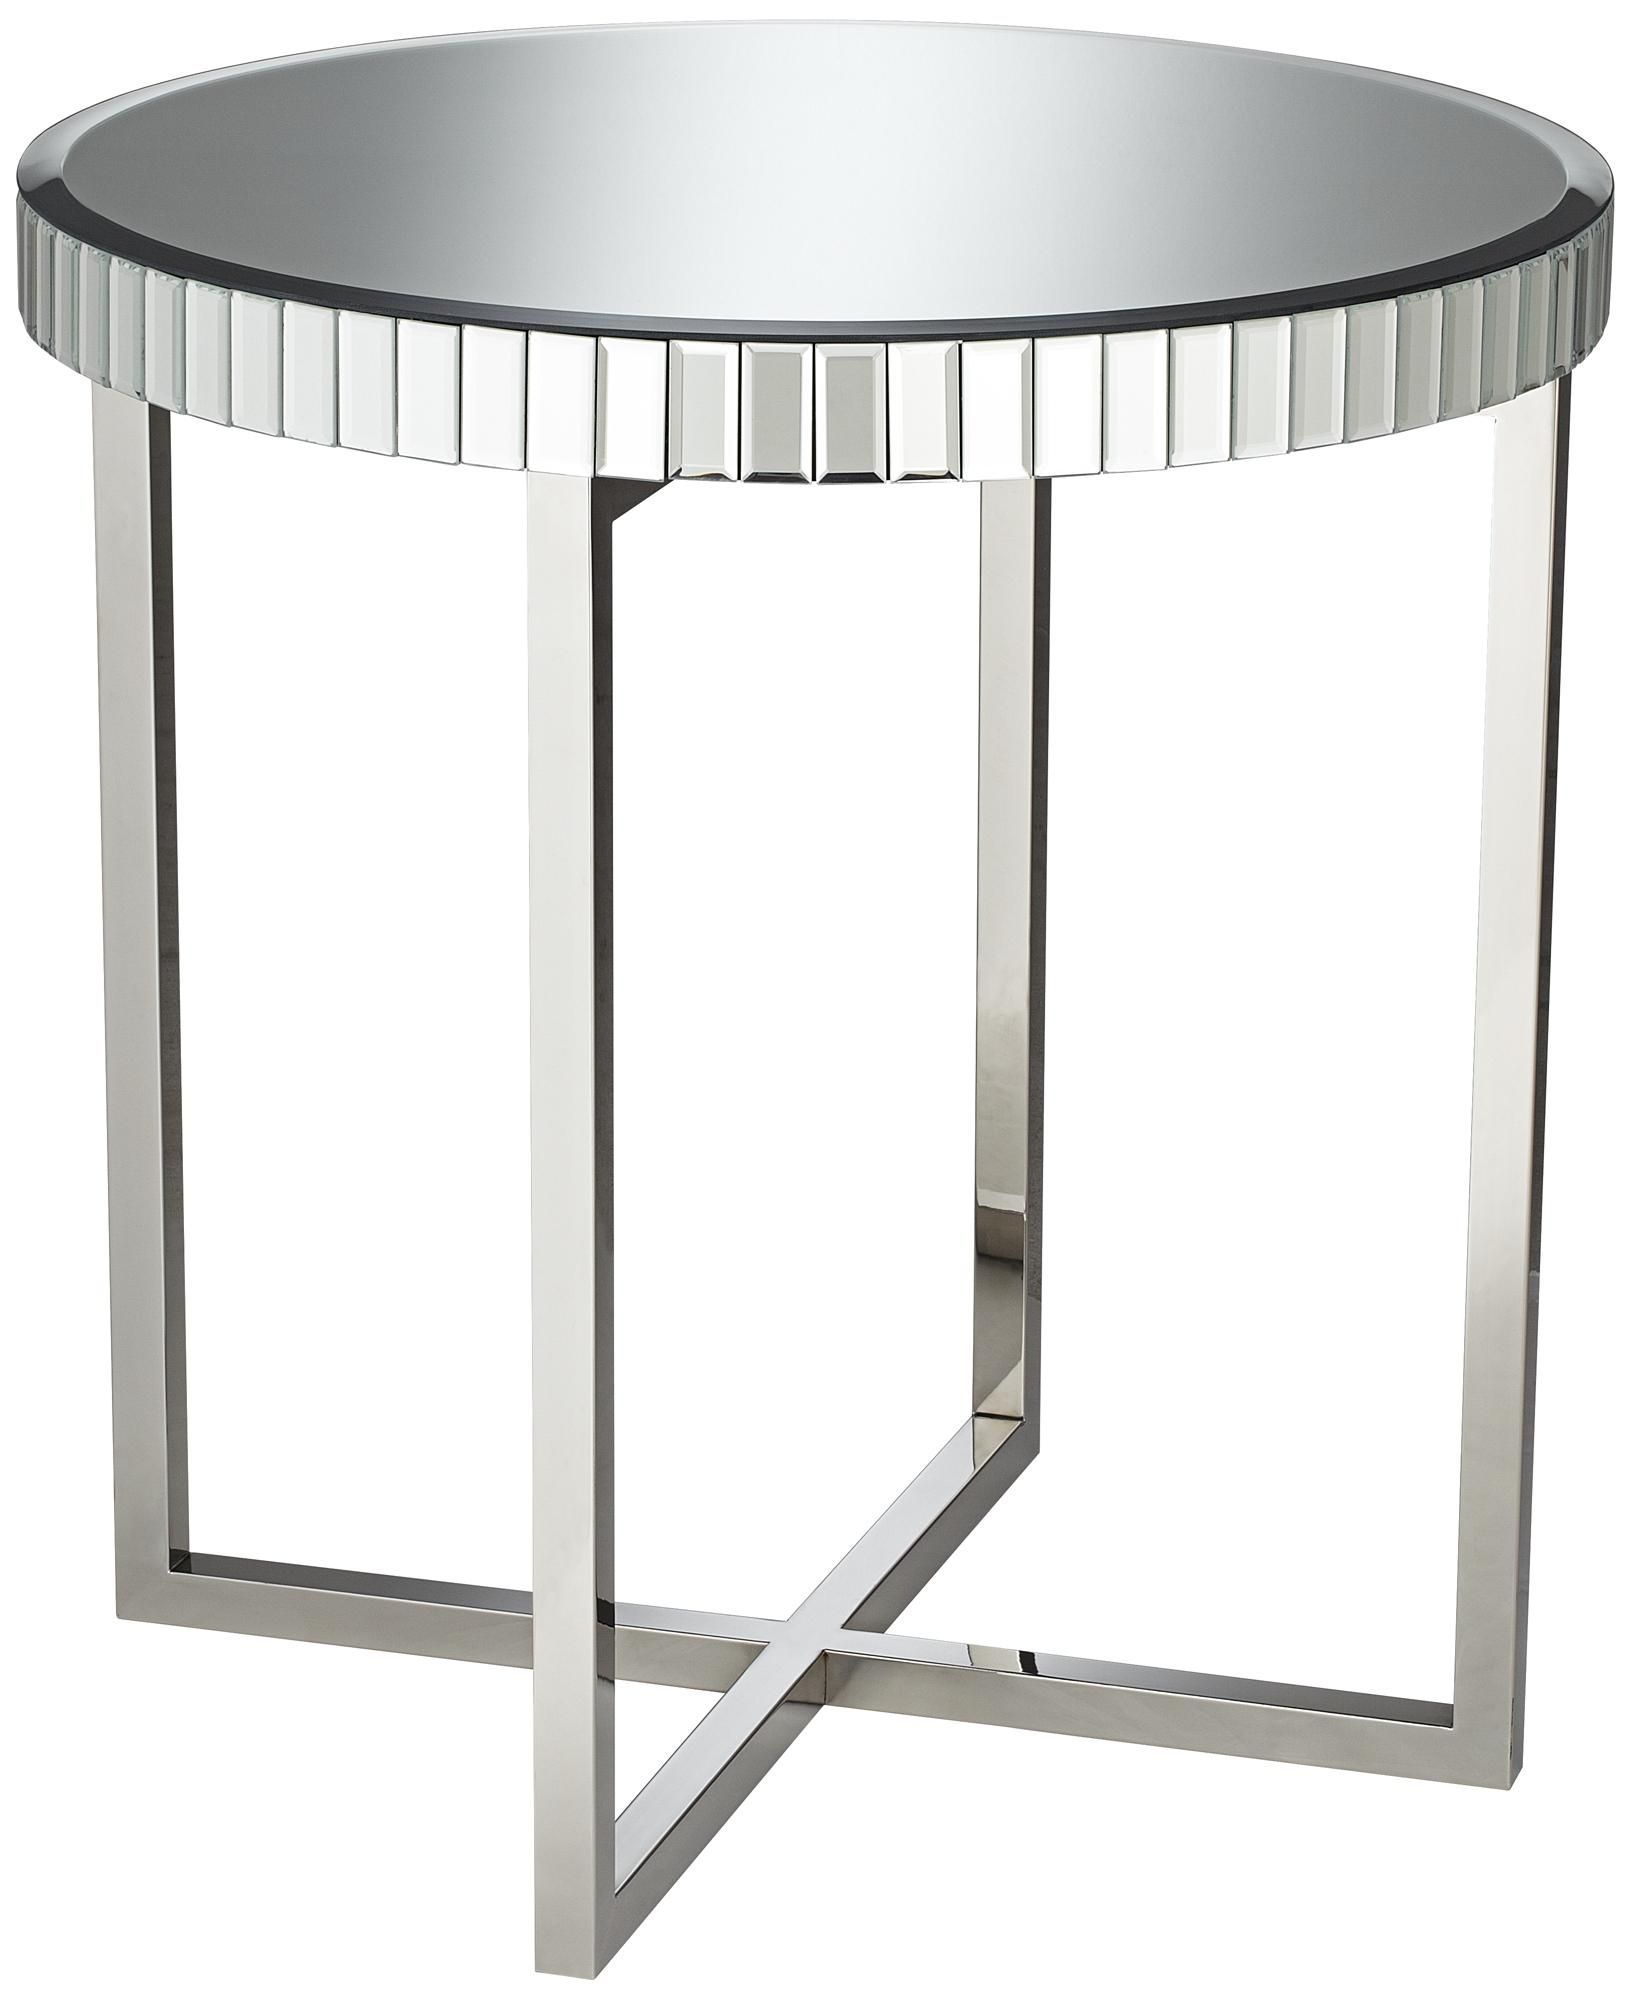 Giselle Round Mirrored End Table – #x0192 | Lamps Plus Within Gold And Mirror Modern Cube End Tables (View 5 of 15)